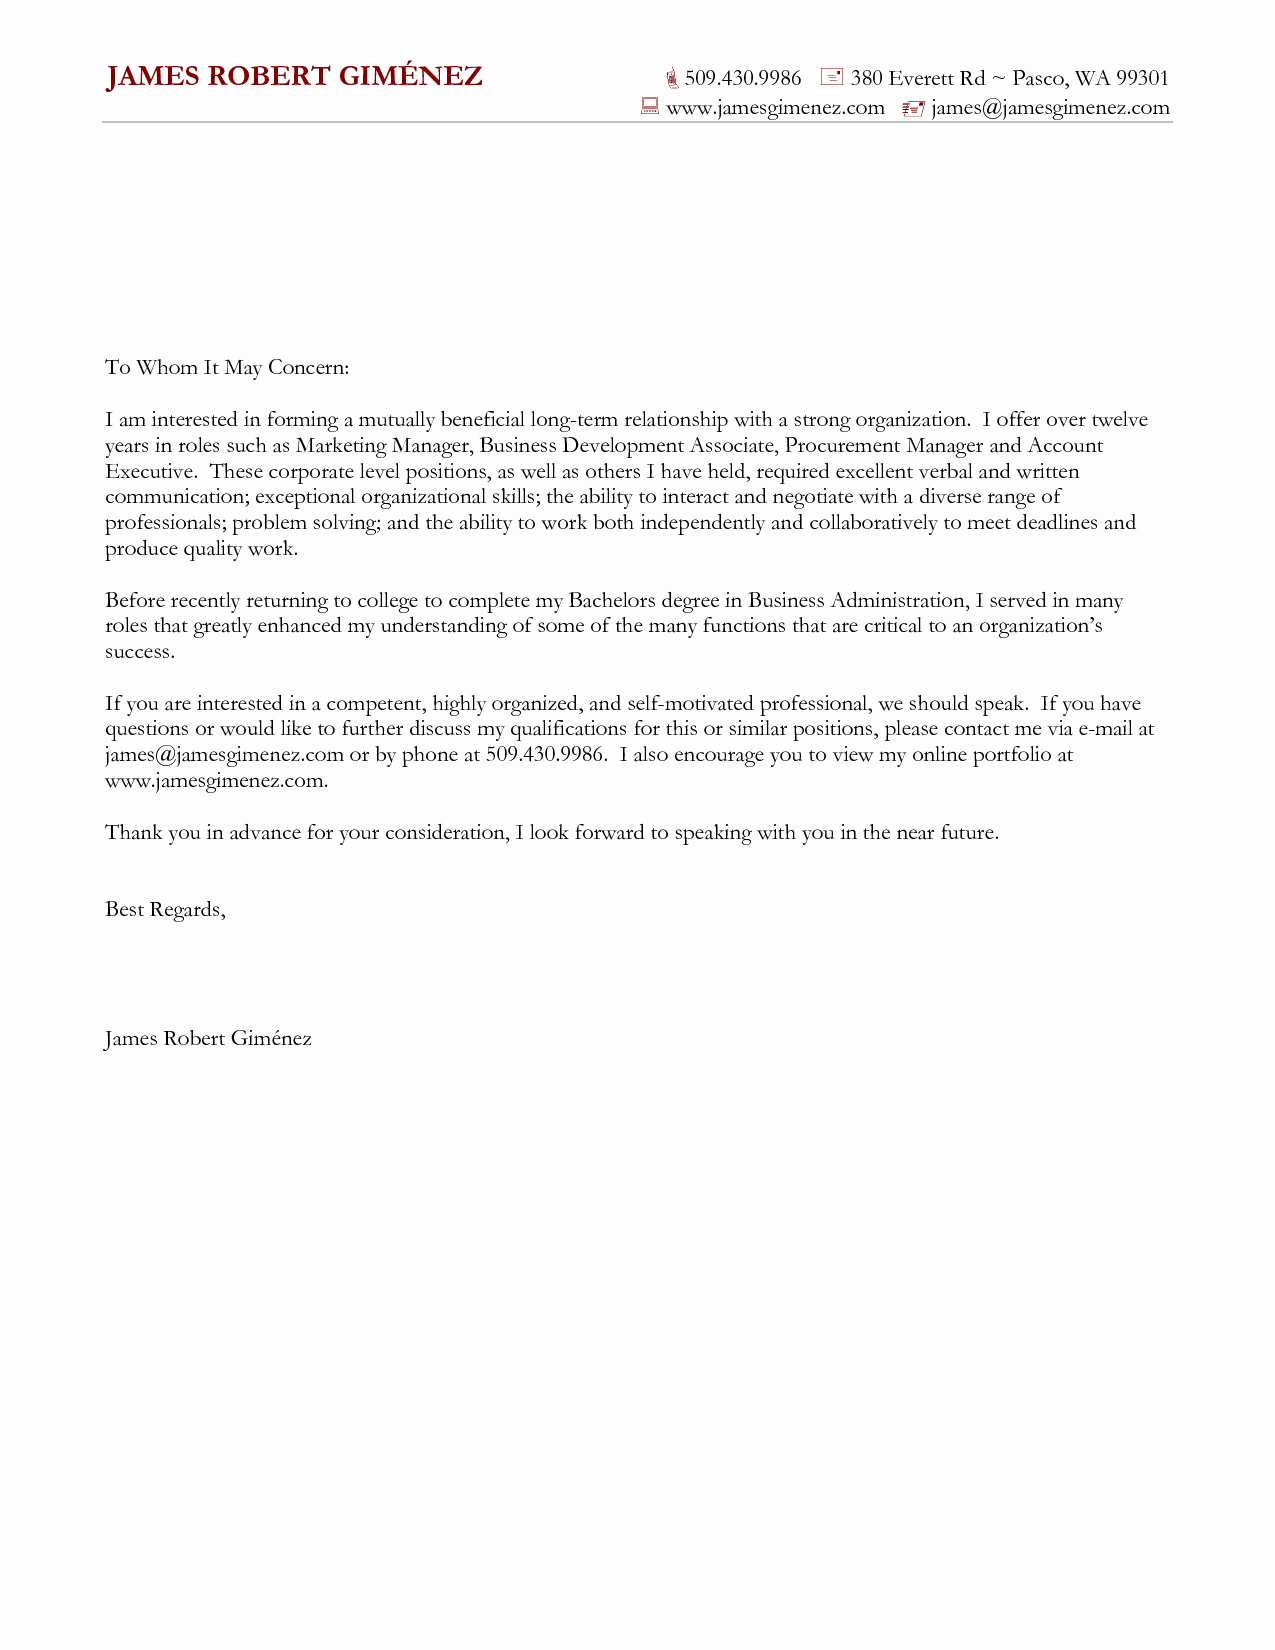 General Cover Letter Examples Unique Cover Letter for General Application Cover Letter